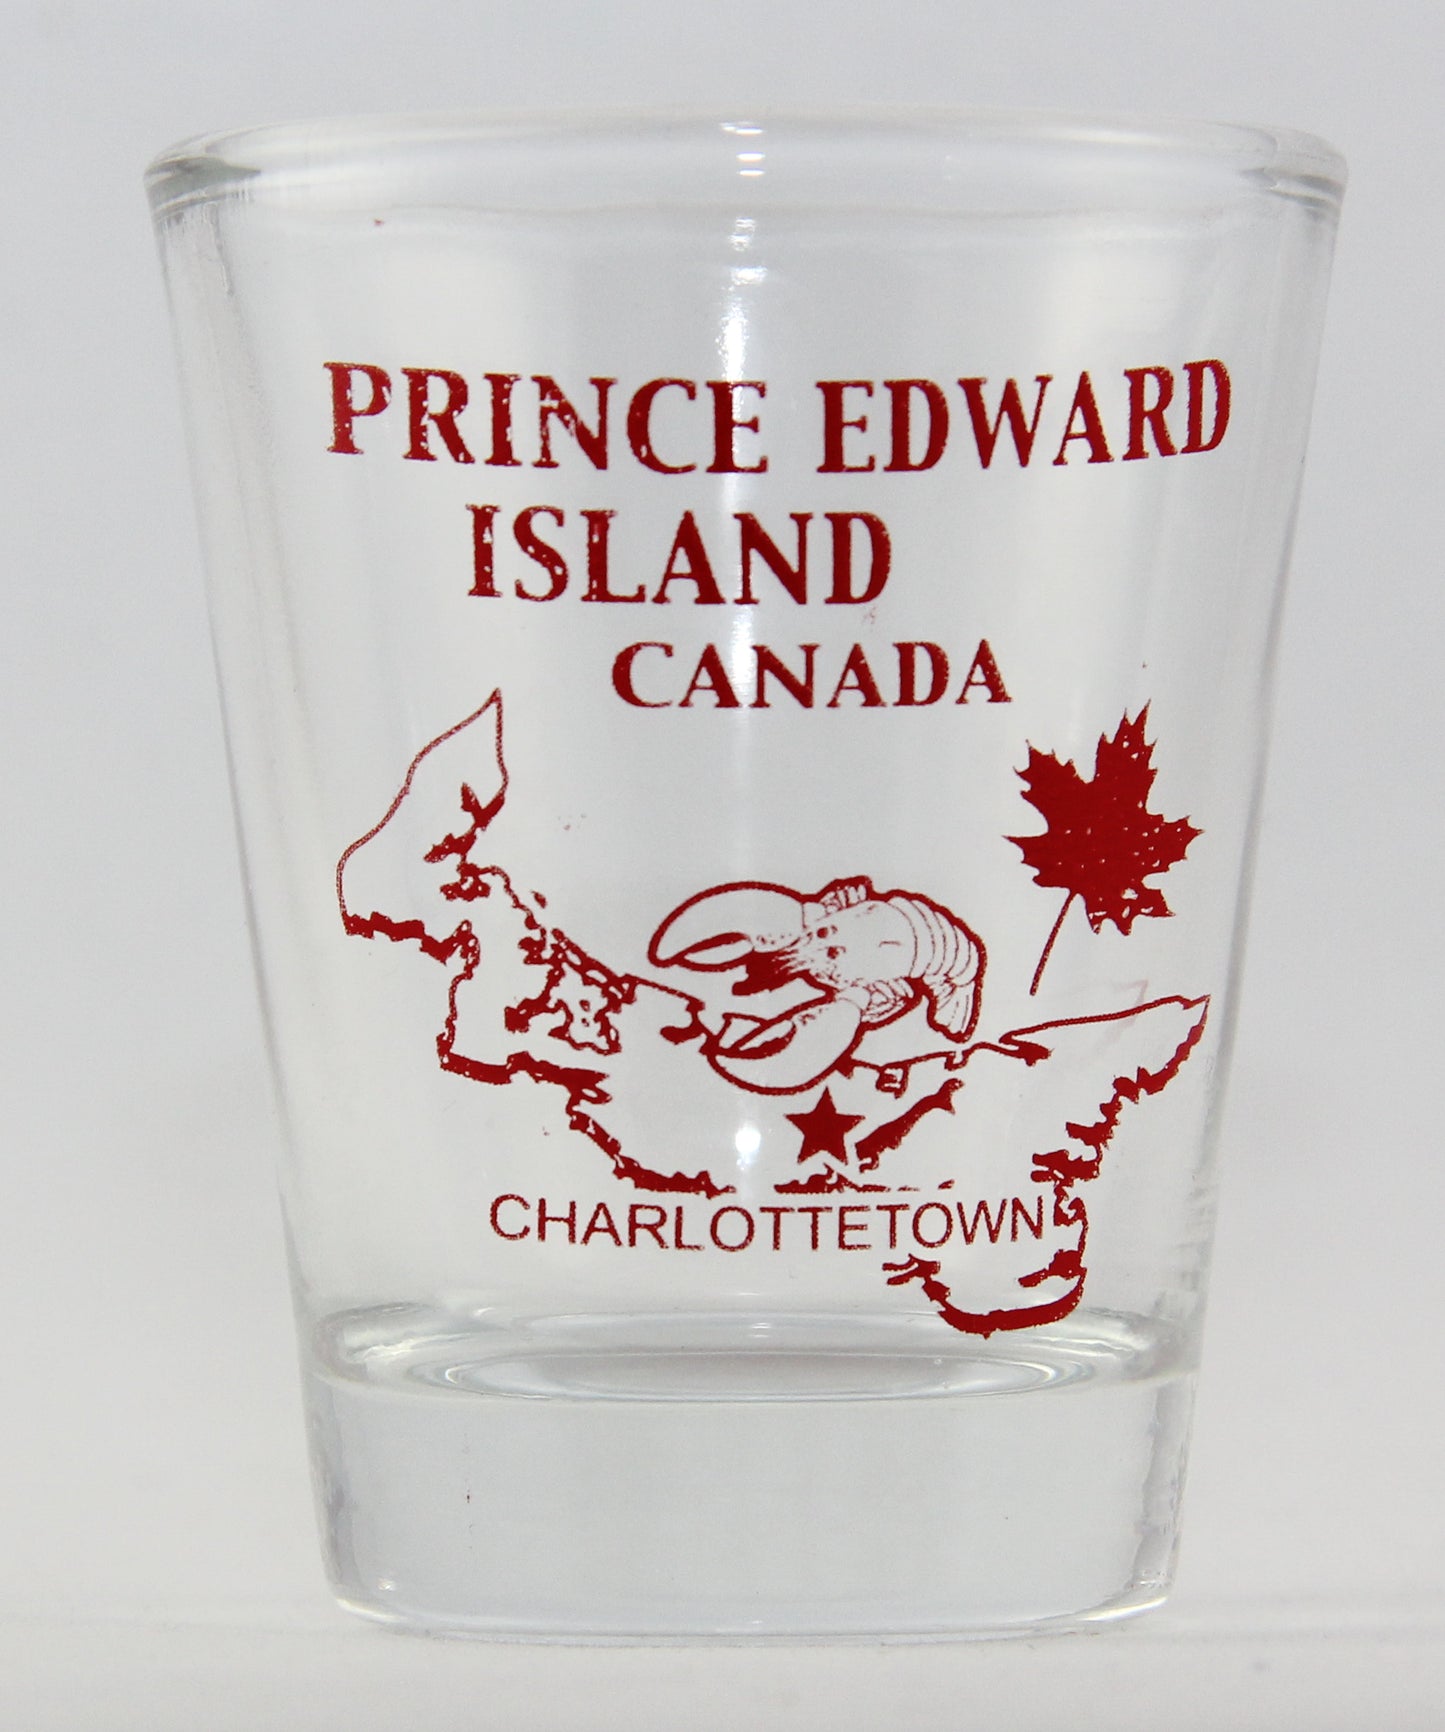 Prince Edward Island Canada (10 in Series of 13) Shot Glass. Collect All!